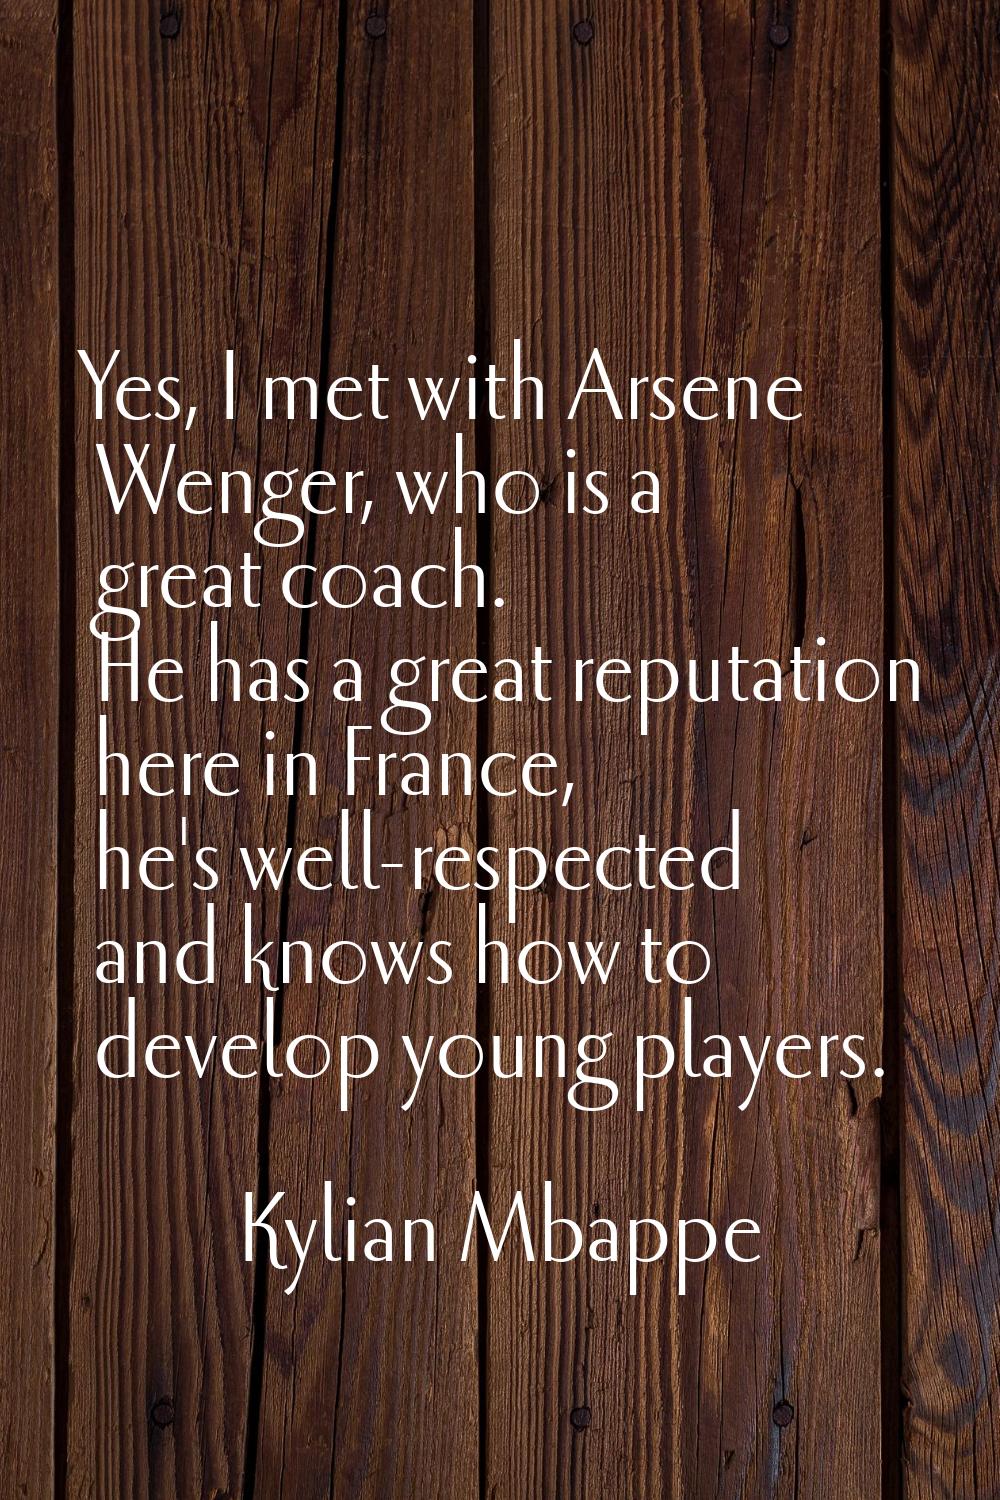 Yes, I met with Arsene Wenger, who is a great coach. He has a great reputation here in France, he's